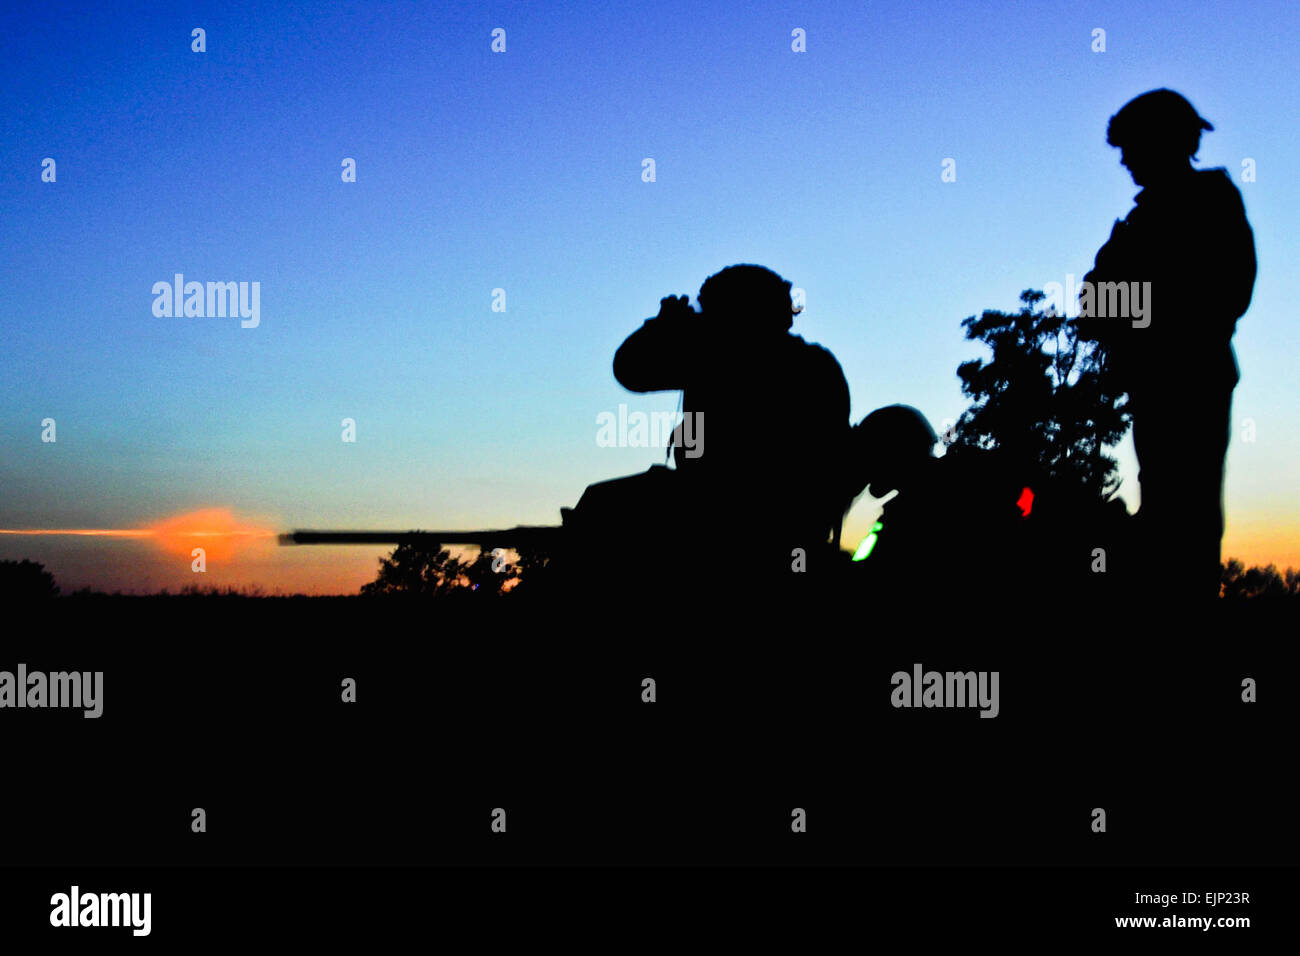 U.S. Army Soldiers and U.S. Navy sailors assigned to a provincial reconstruction team fire a .50-caliber machine gun during night weapons qualifications at Camp Atterbury as a part of pre-deployment training. Ten PRTs are preparing for an upcoming deployment to Afghanistan to support security, governance and socioeconomic development. Stock Photo